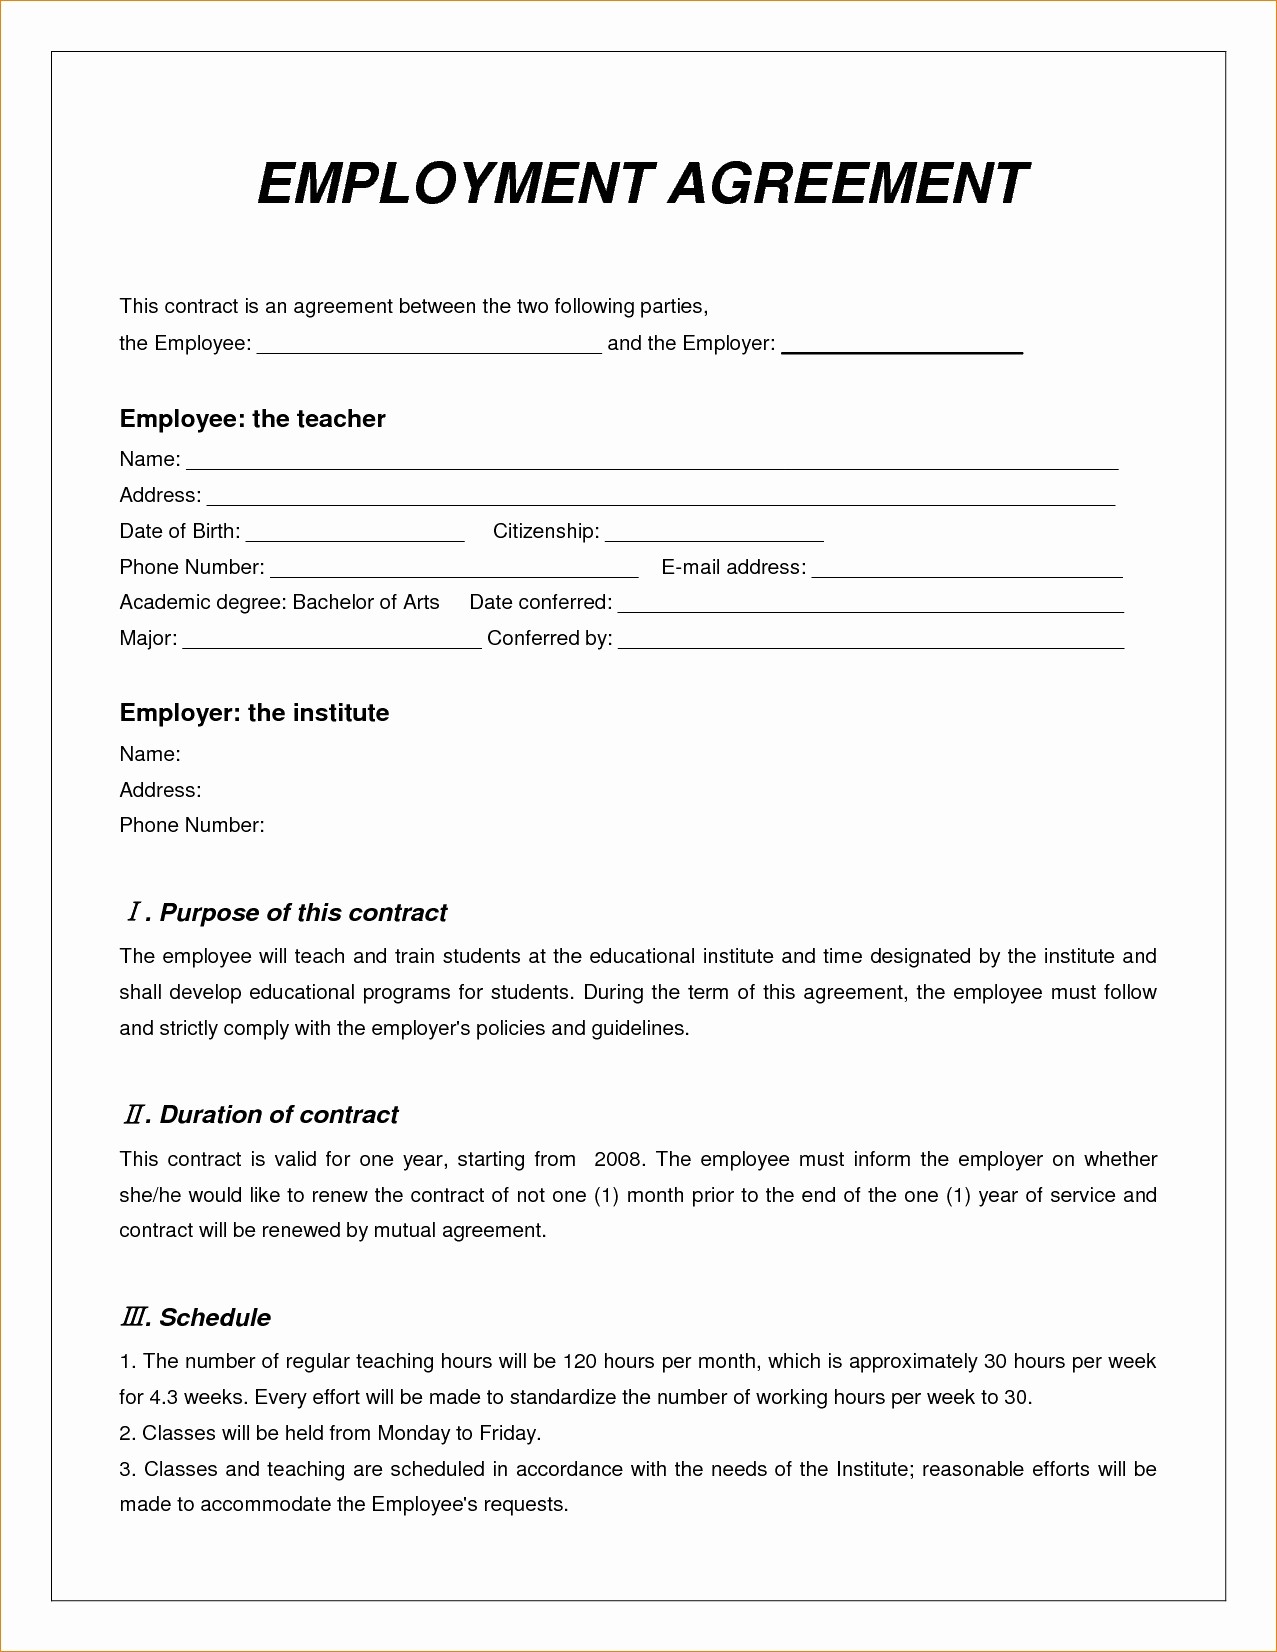 50 Beautiful Referral Partner Agreement Template DOCUMENTS IDEAS Document